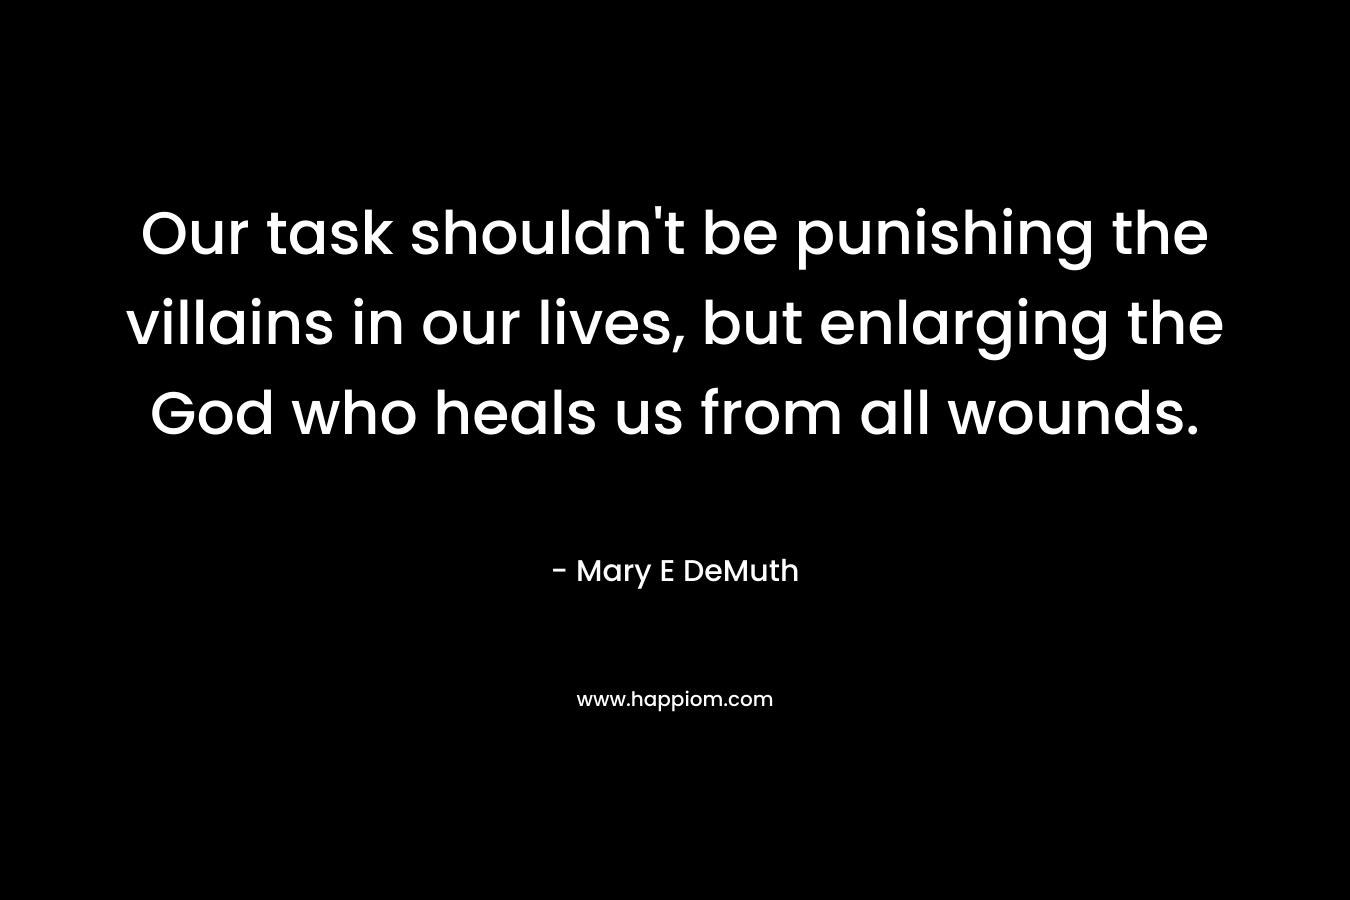 Our task shouldn’t be punishing the villains in our lives, but enlarging the God who heals us from all wounds. – Mary E DeMuth